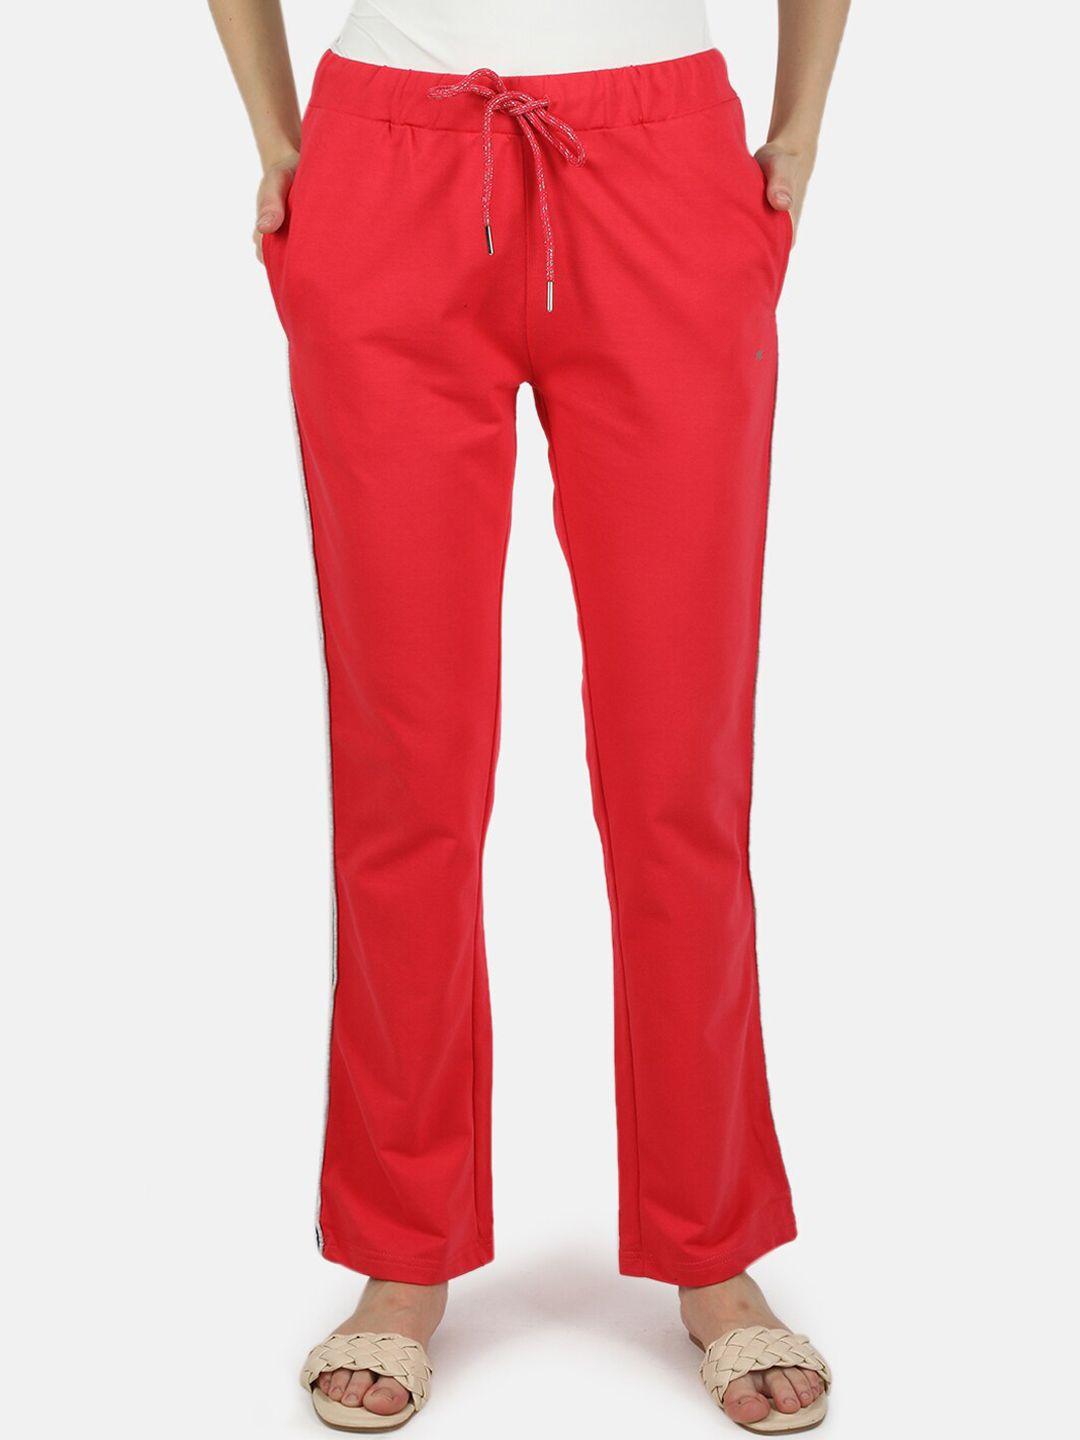 monte carlo women red solid lounge pants